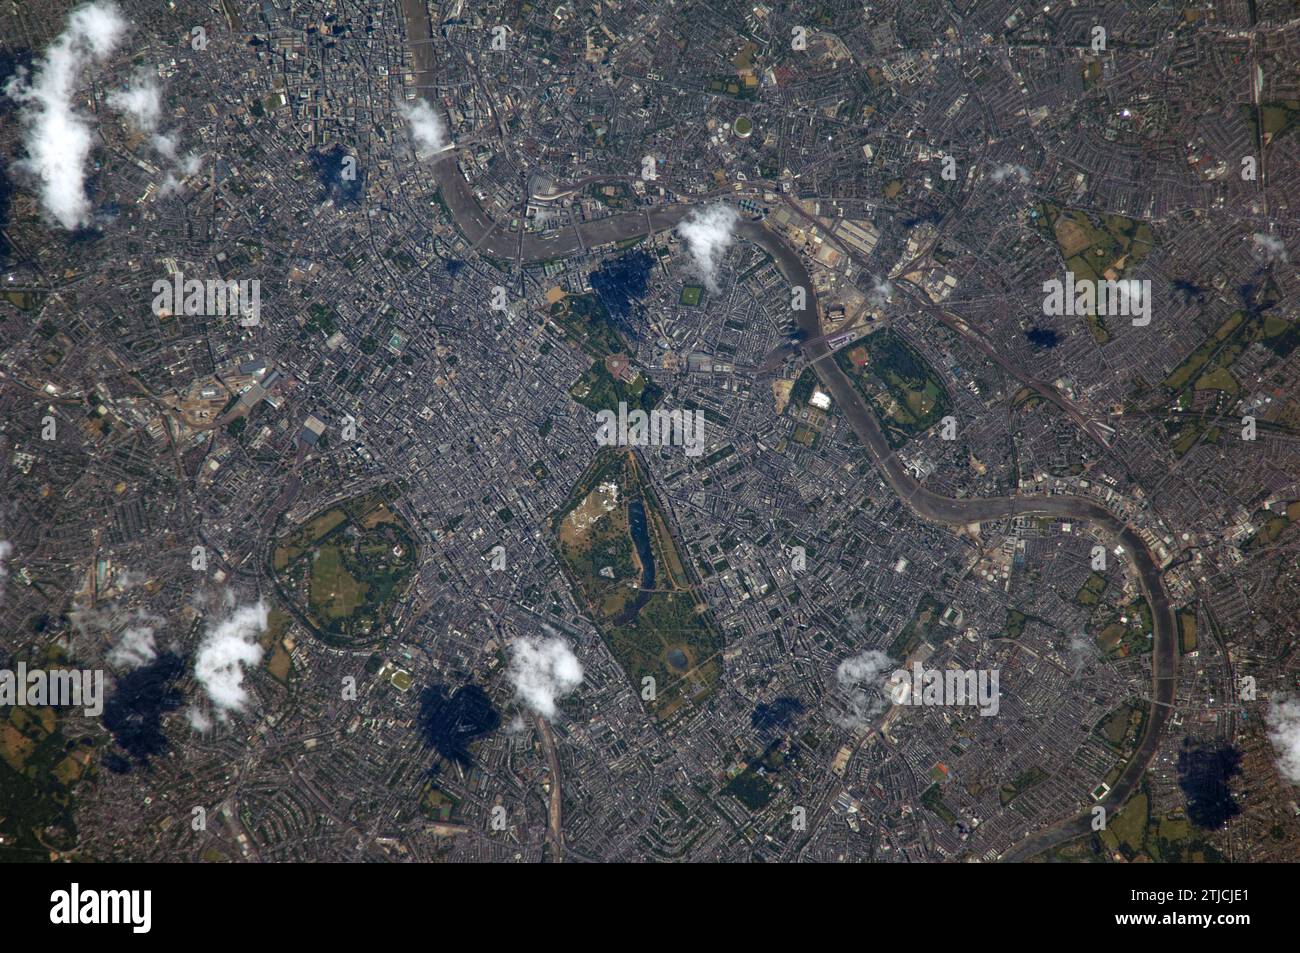 London, England seen from the International Space on July 4th 2014. Taken from an altitude of 221 nautical miles using an 800mm lens. The capital of the United Kingdom. The River Thames and the urban parks (Regents Park centre) are clearly visible.  An Optimised version of an original NASA image / Credit: NASA Stock Photo